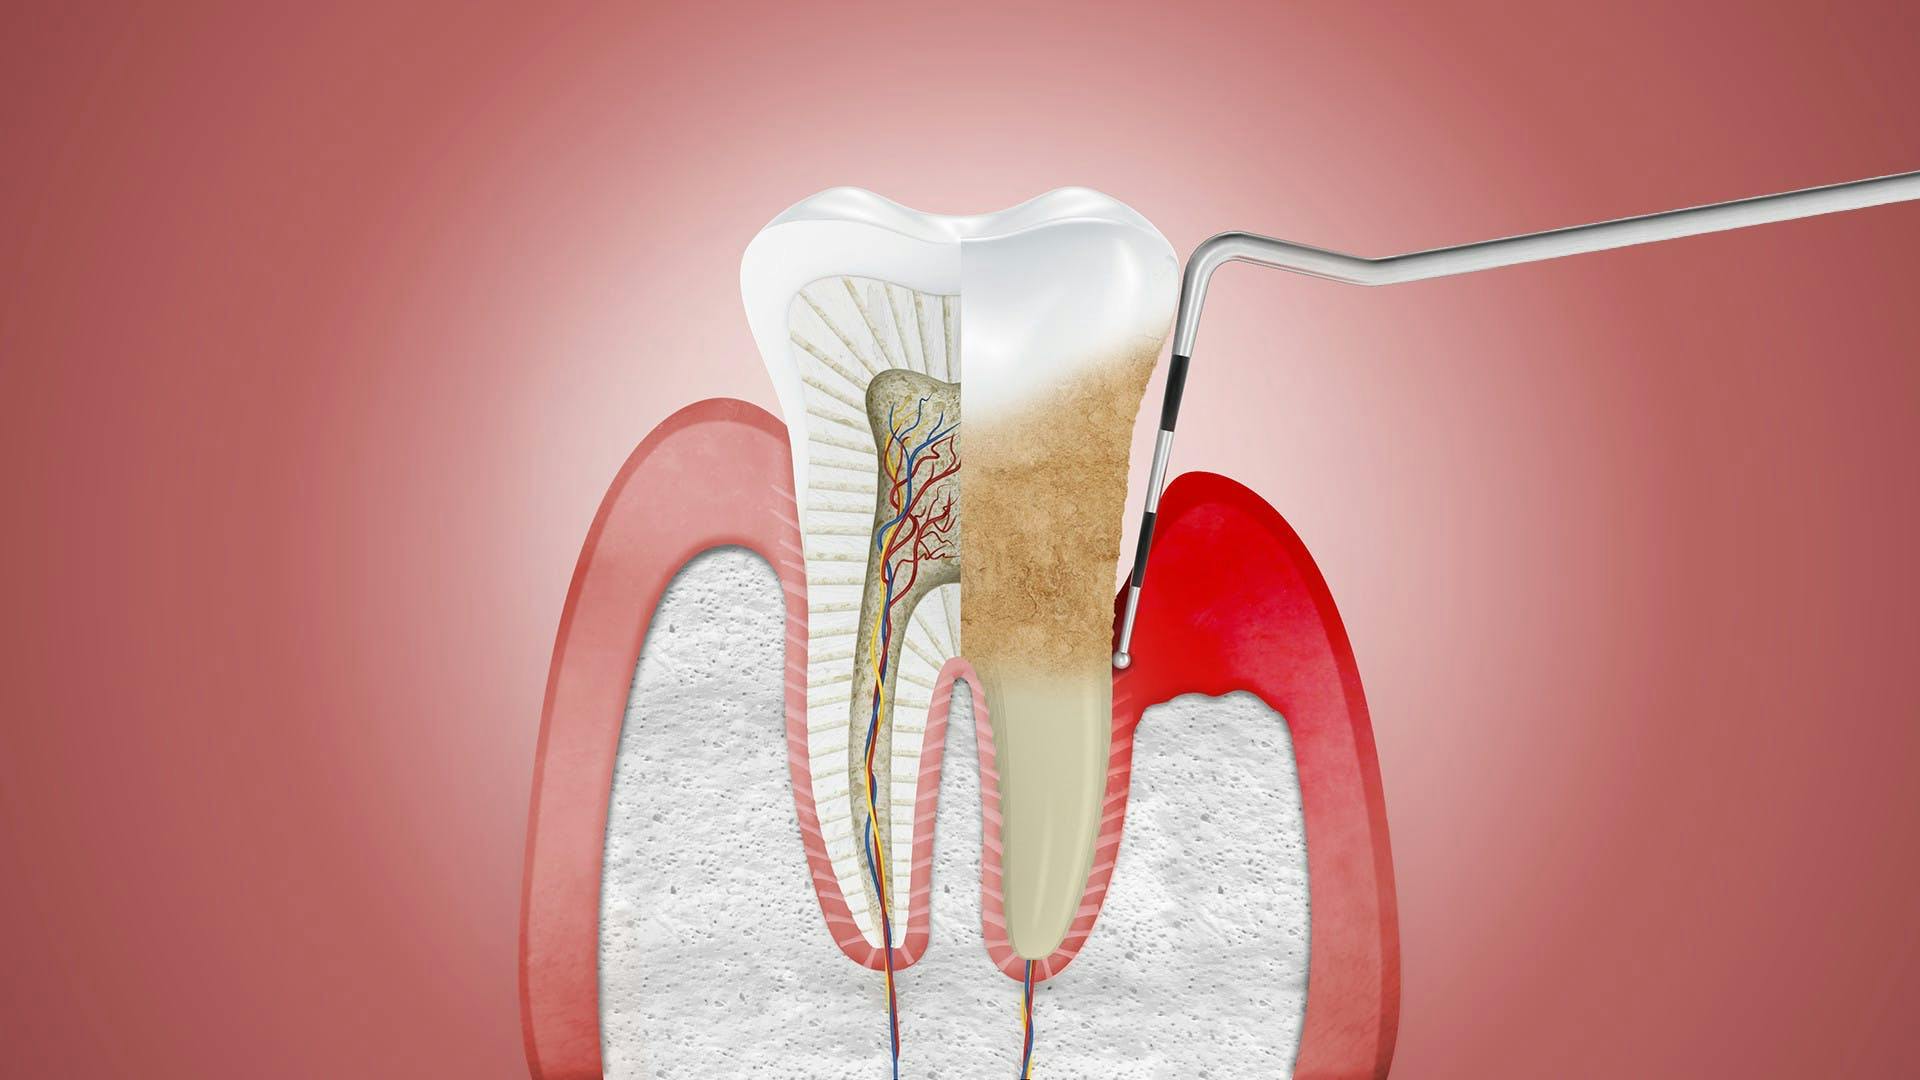 Illustration of gums affected by gingivitis, with dentist tool